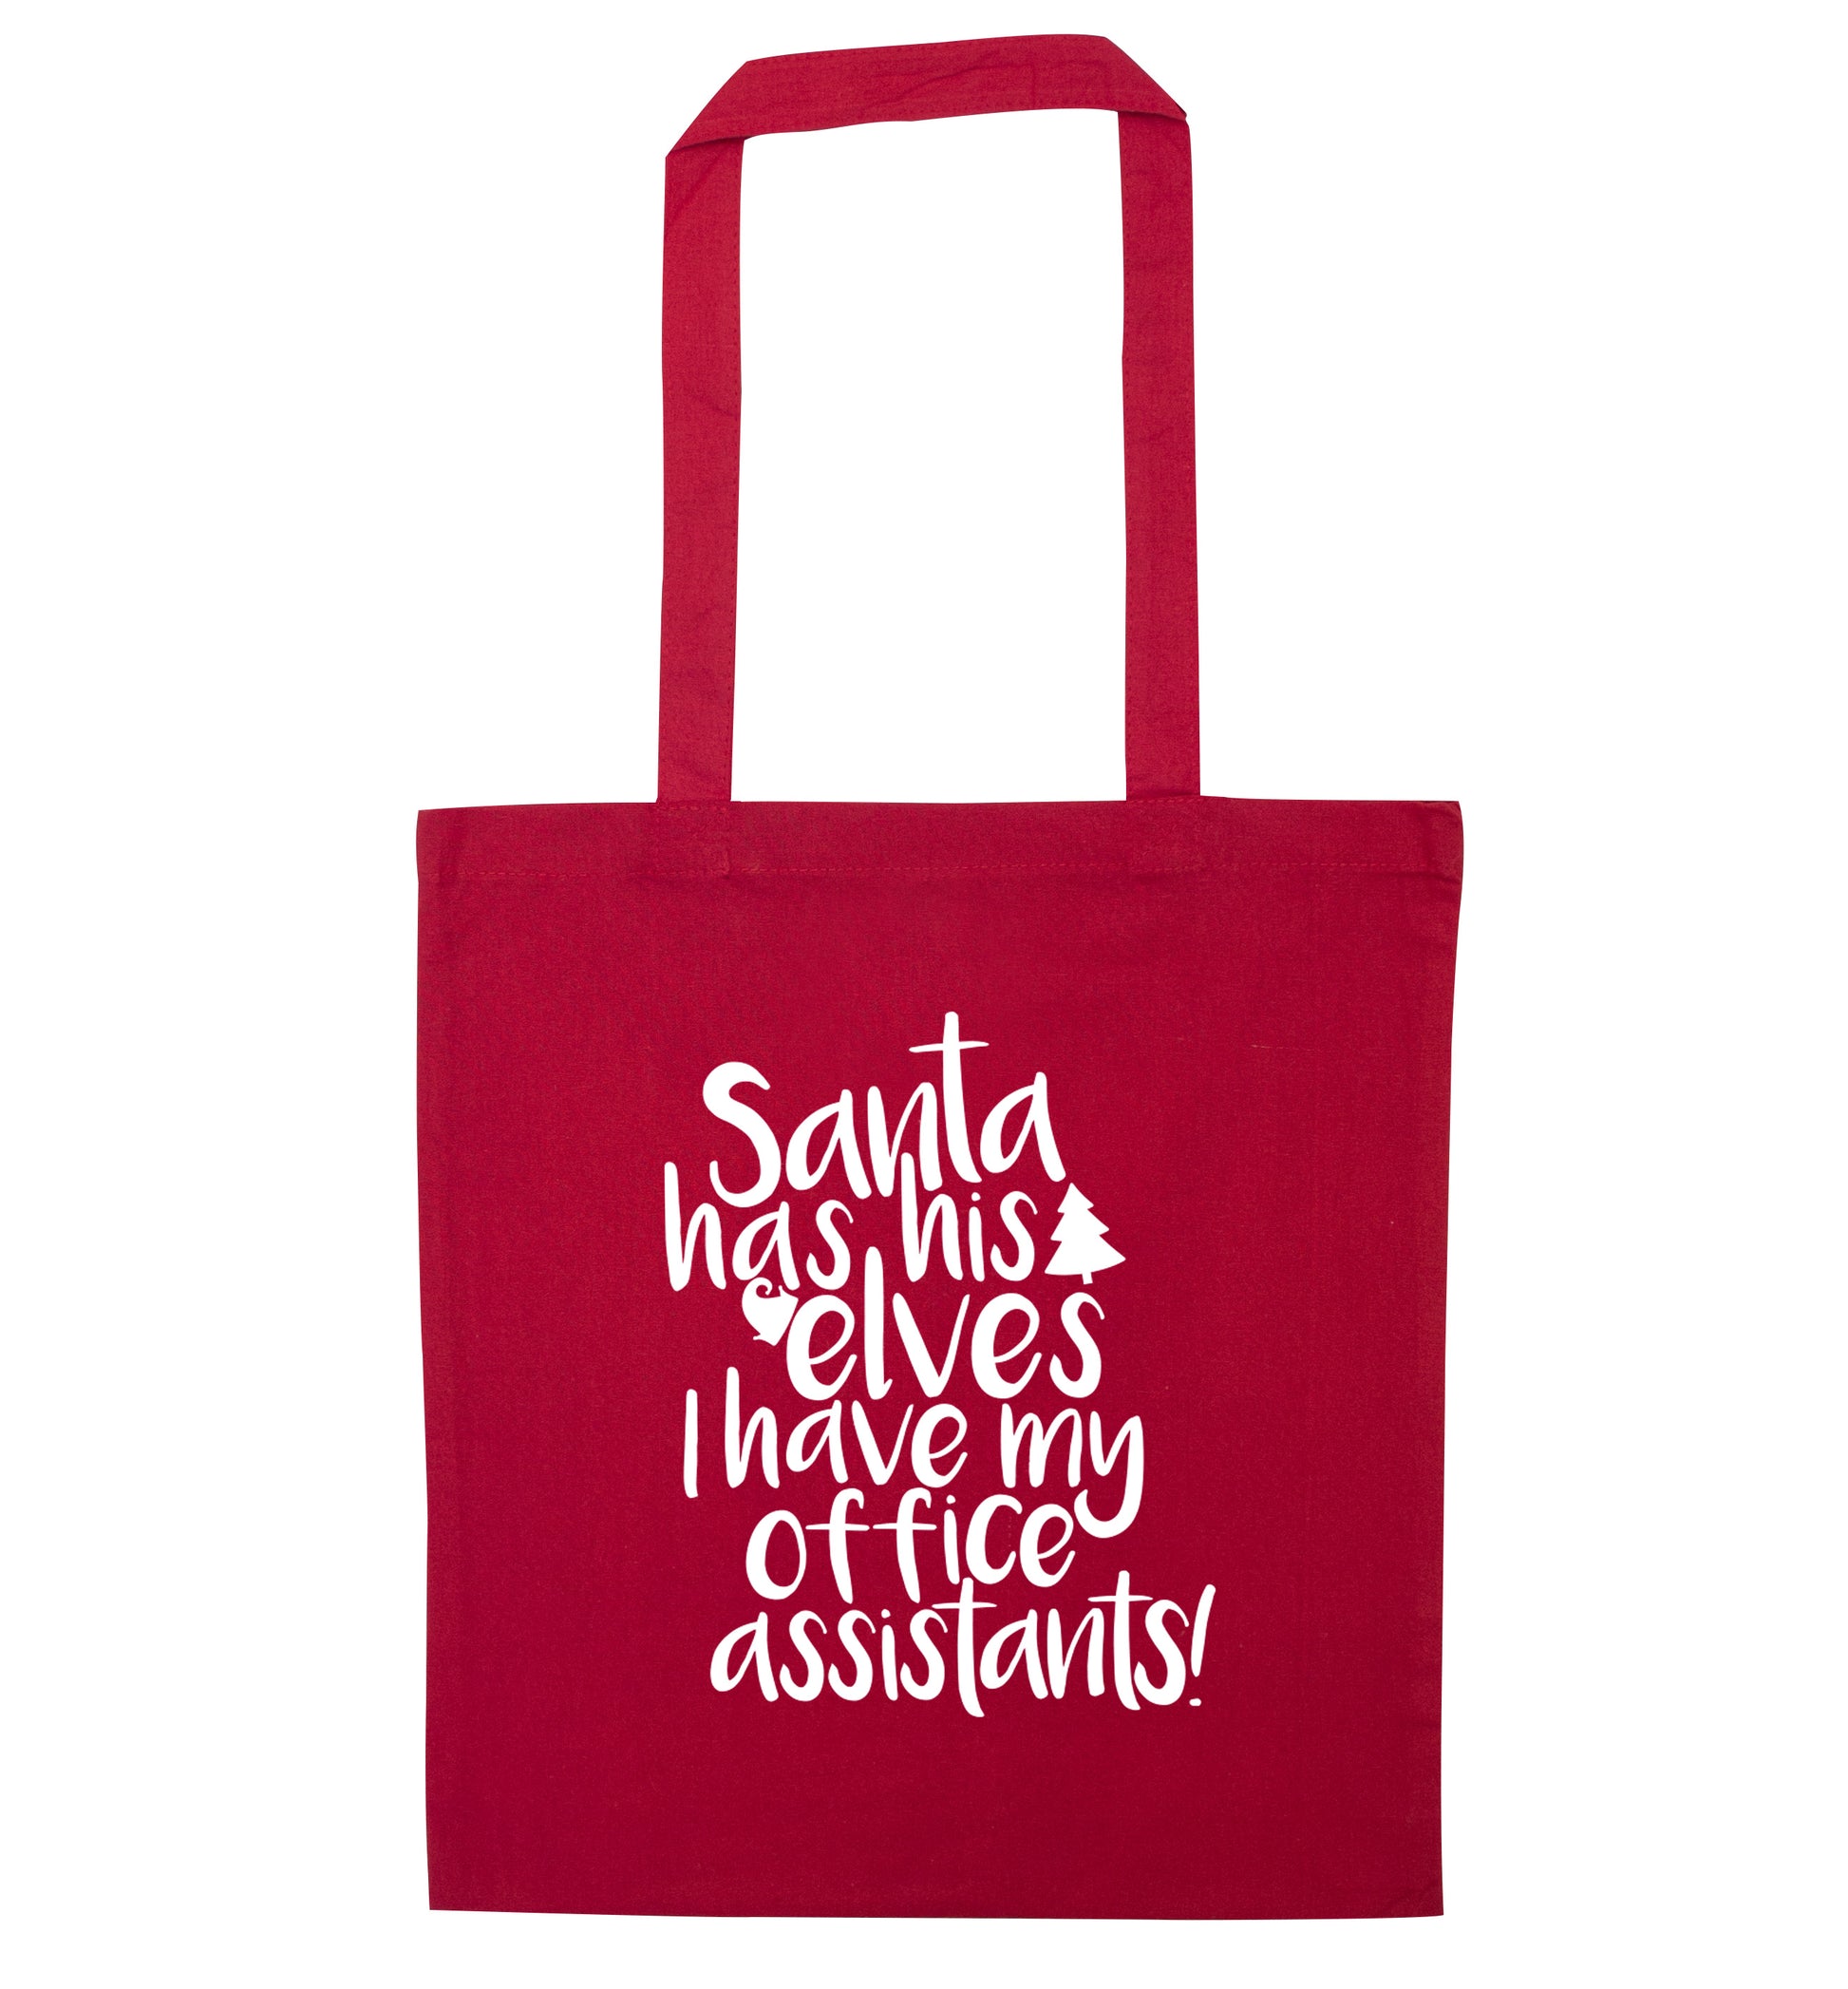 Santa has his elves I have my office assistants red tote bag